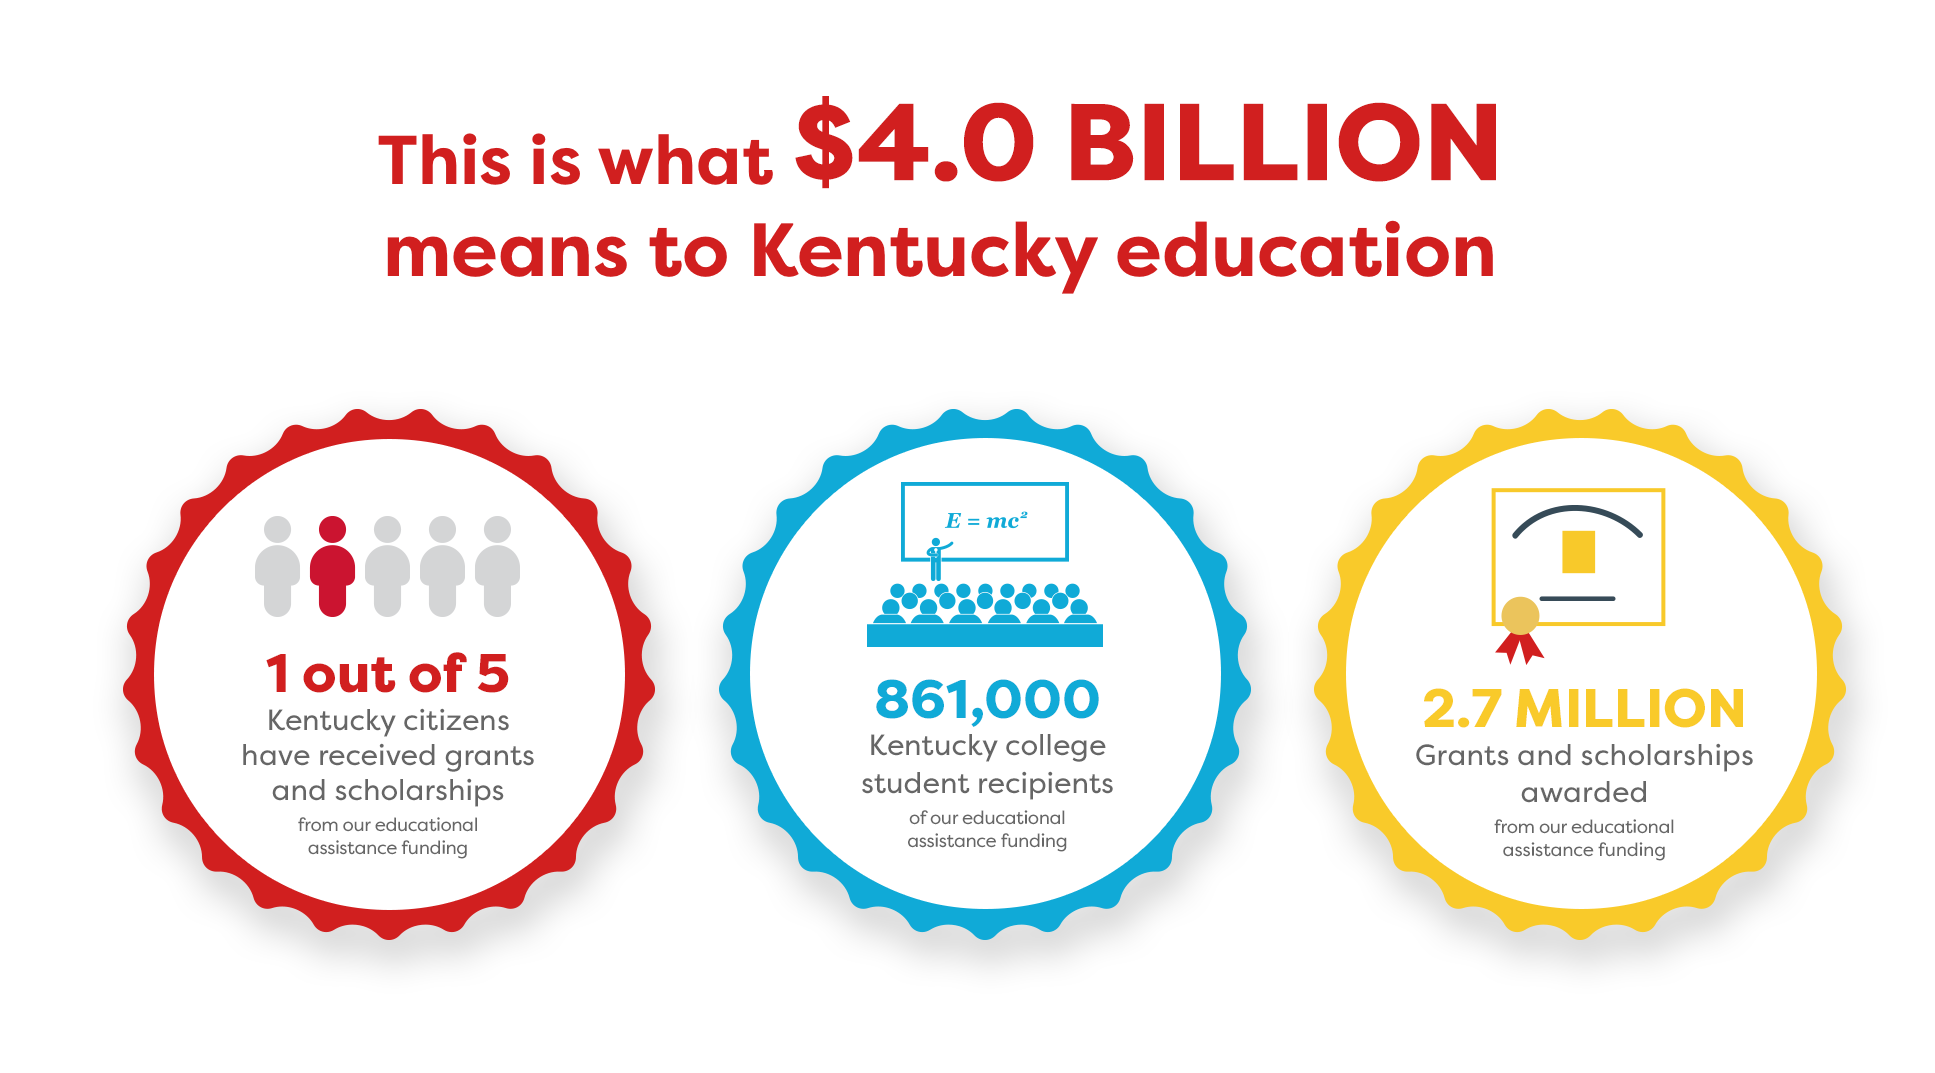 This is what $4.0 Billion means 1 out of 5 KY citizens received grants and scholarships, 861,000 KY college recipients, 2.7 Million grants and scholarships awarded